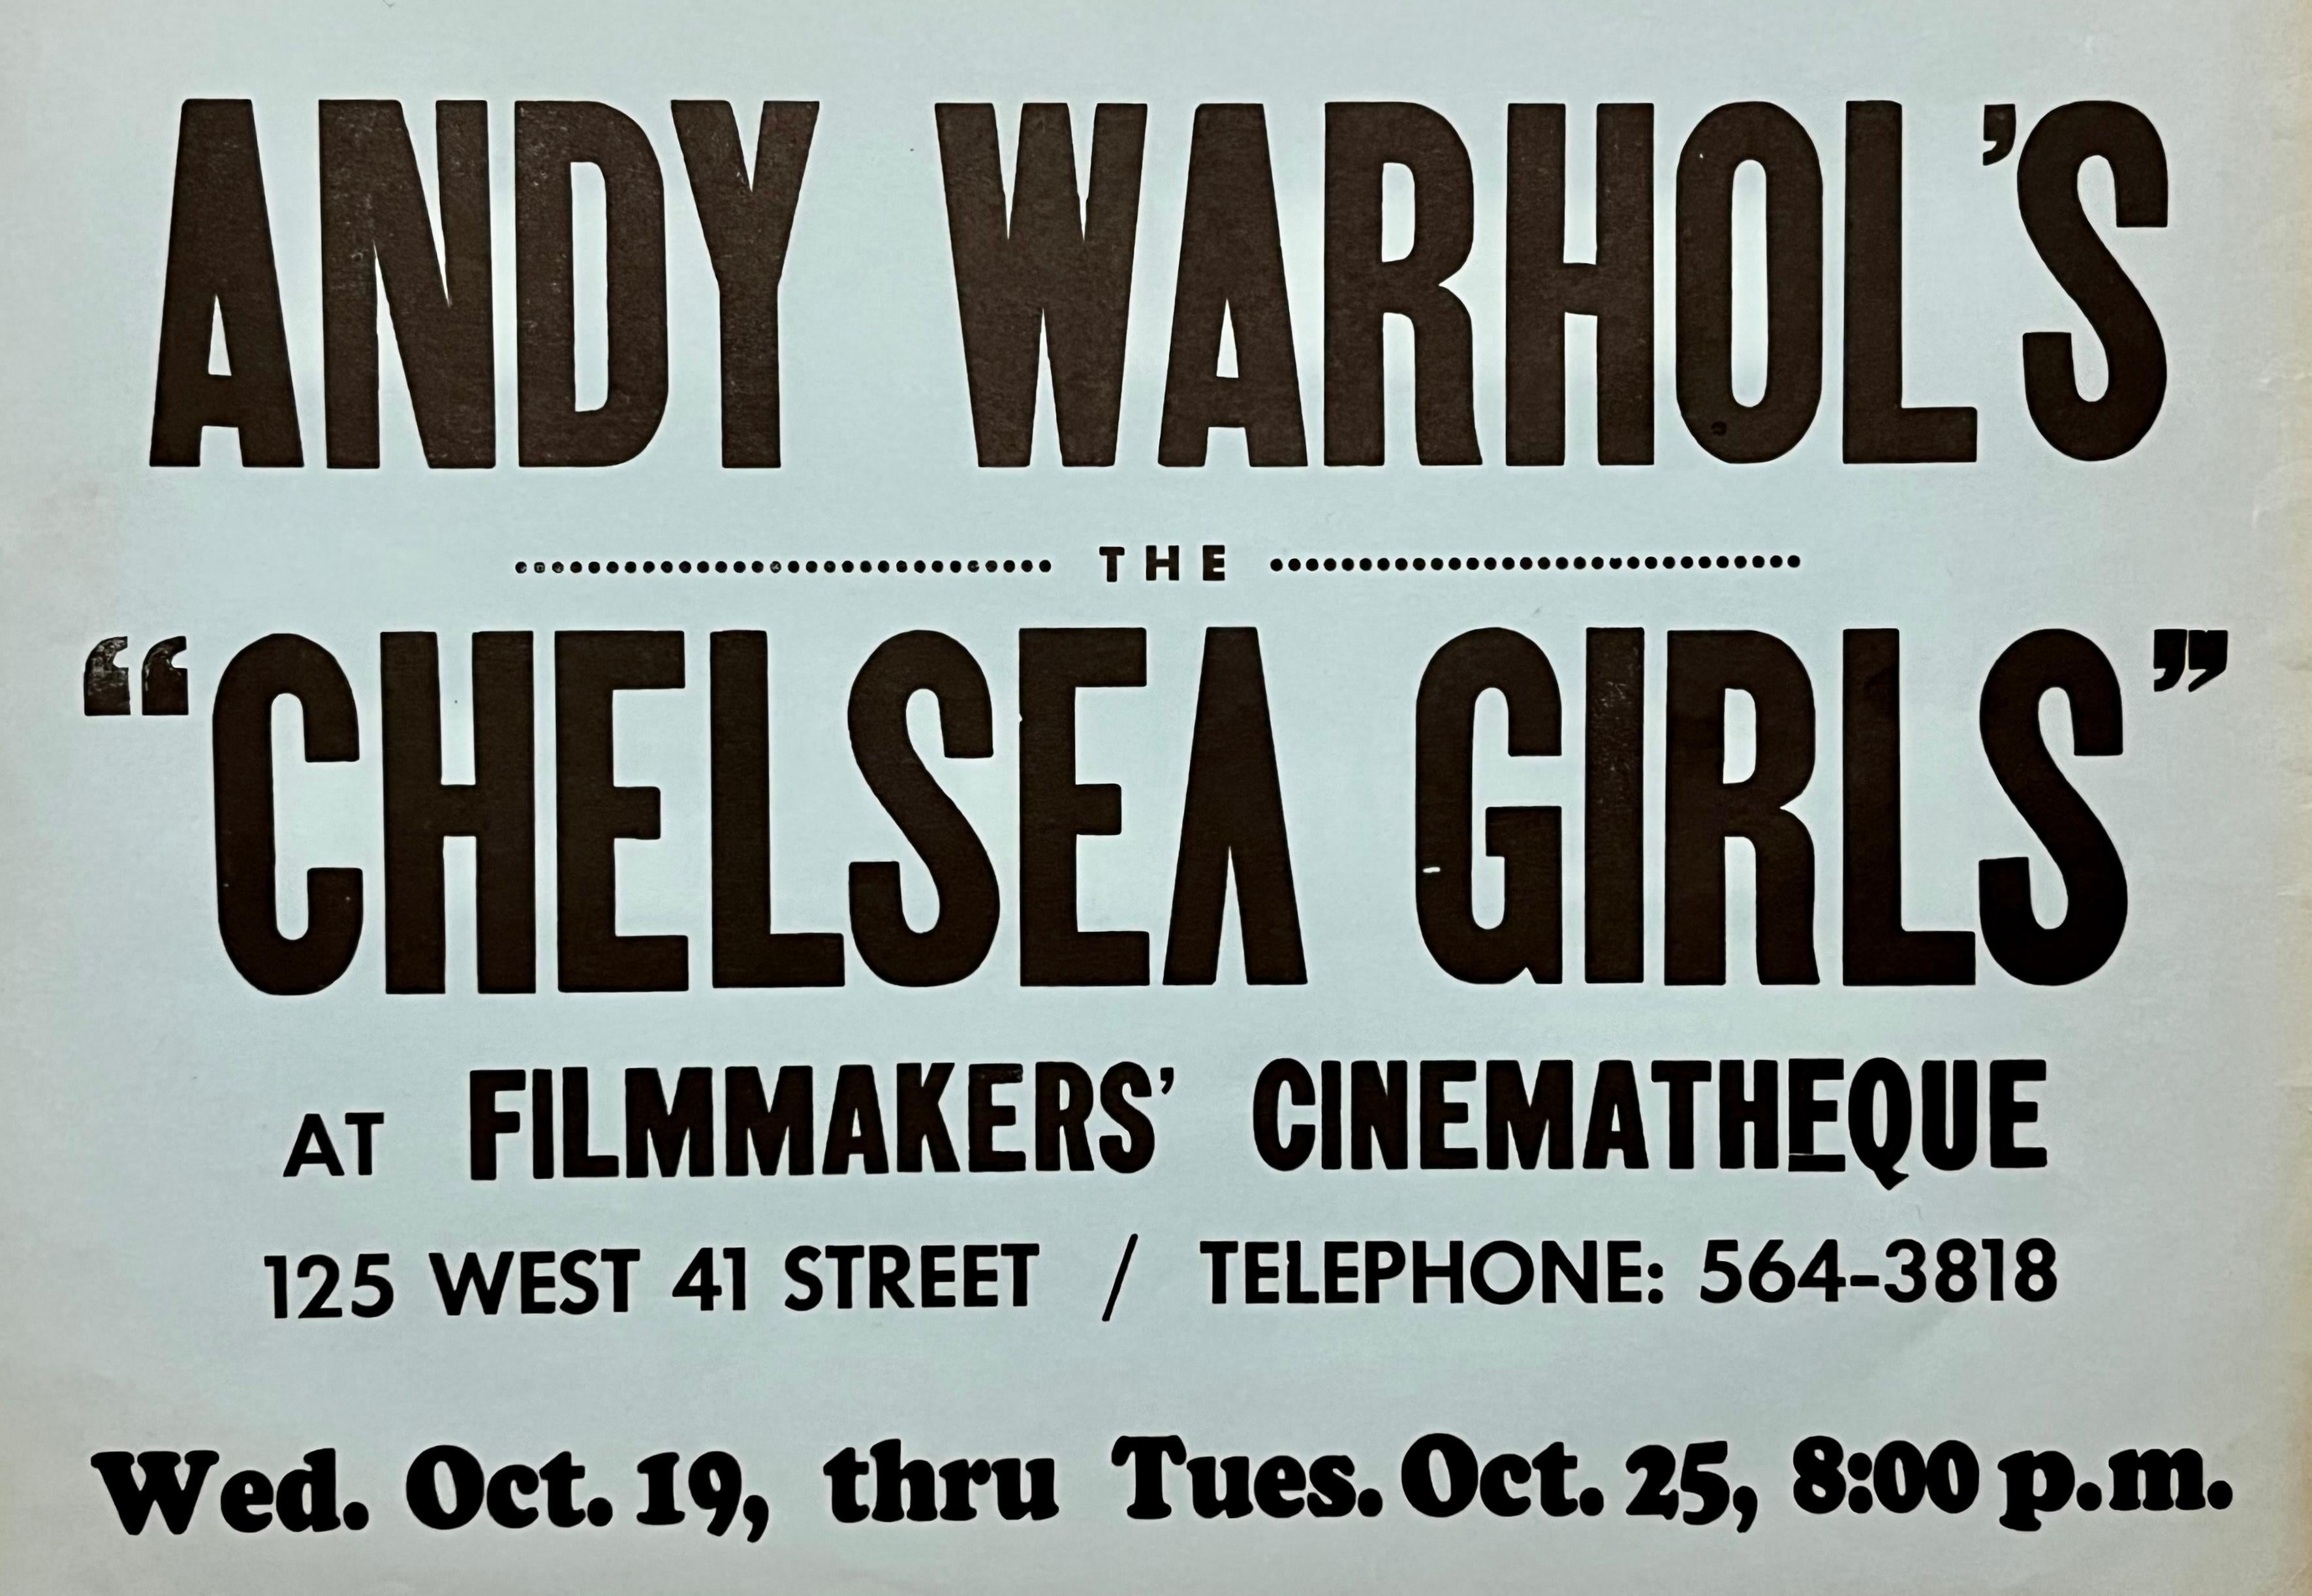 Andy Warhol Chelsea Girls 1966 (announcement) - Art by (after) Andy Warhol